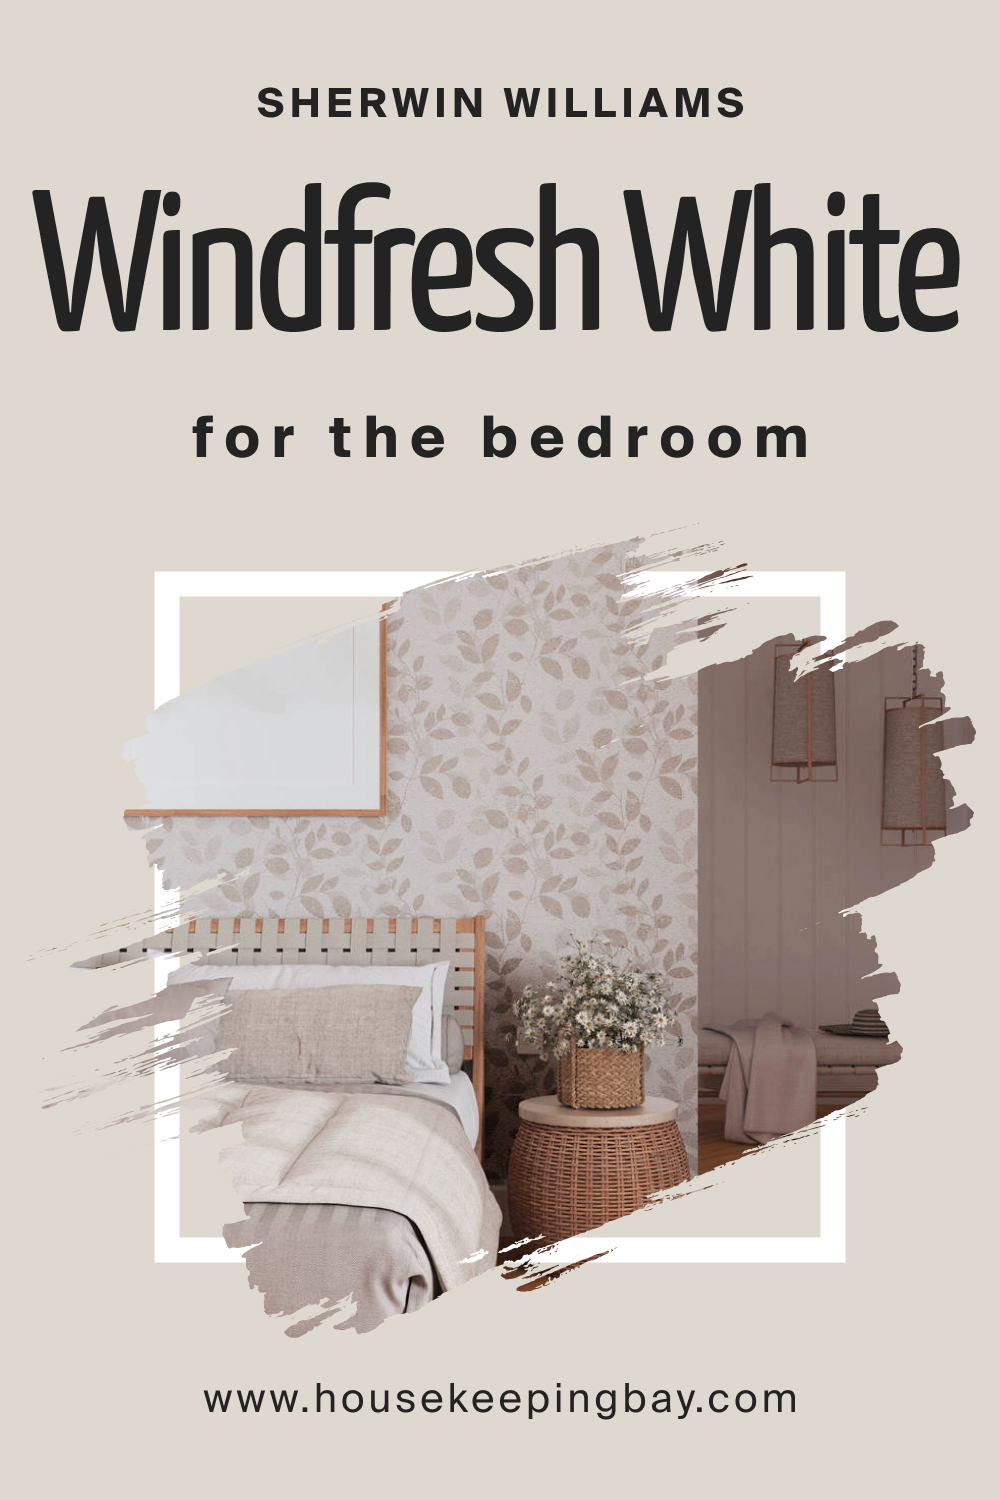 Sherwin Williams. SW Windfresh White For the bedroom